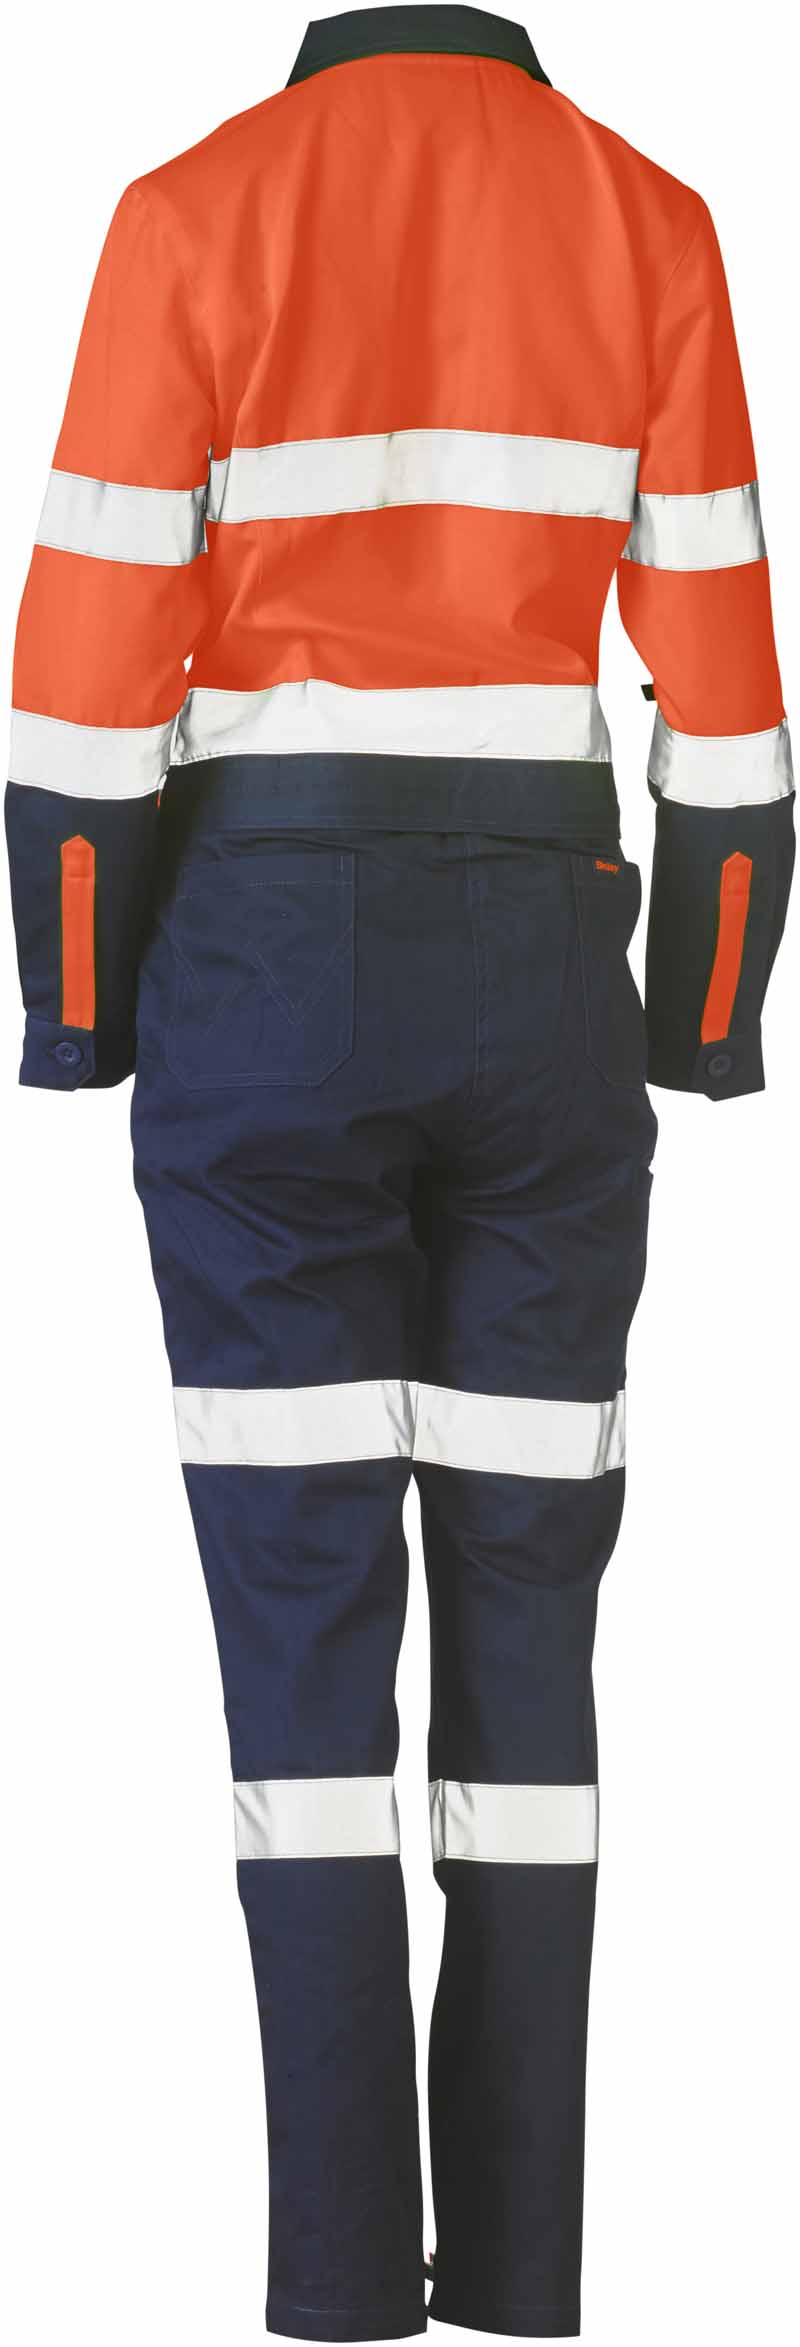 Bisley Womens Taped Two Toned Hi Vis Cotton Drill Coverall - BCL6066T